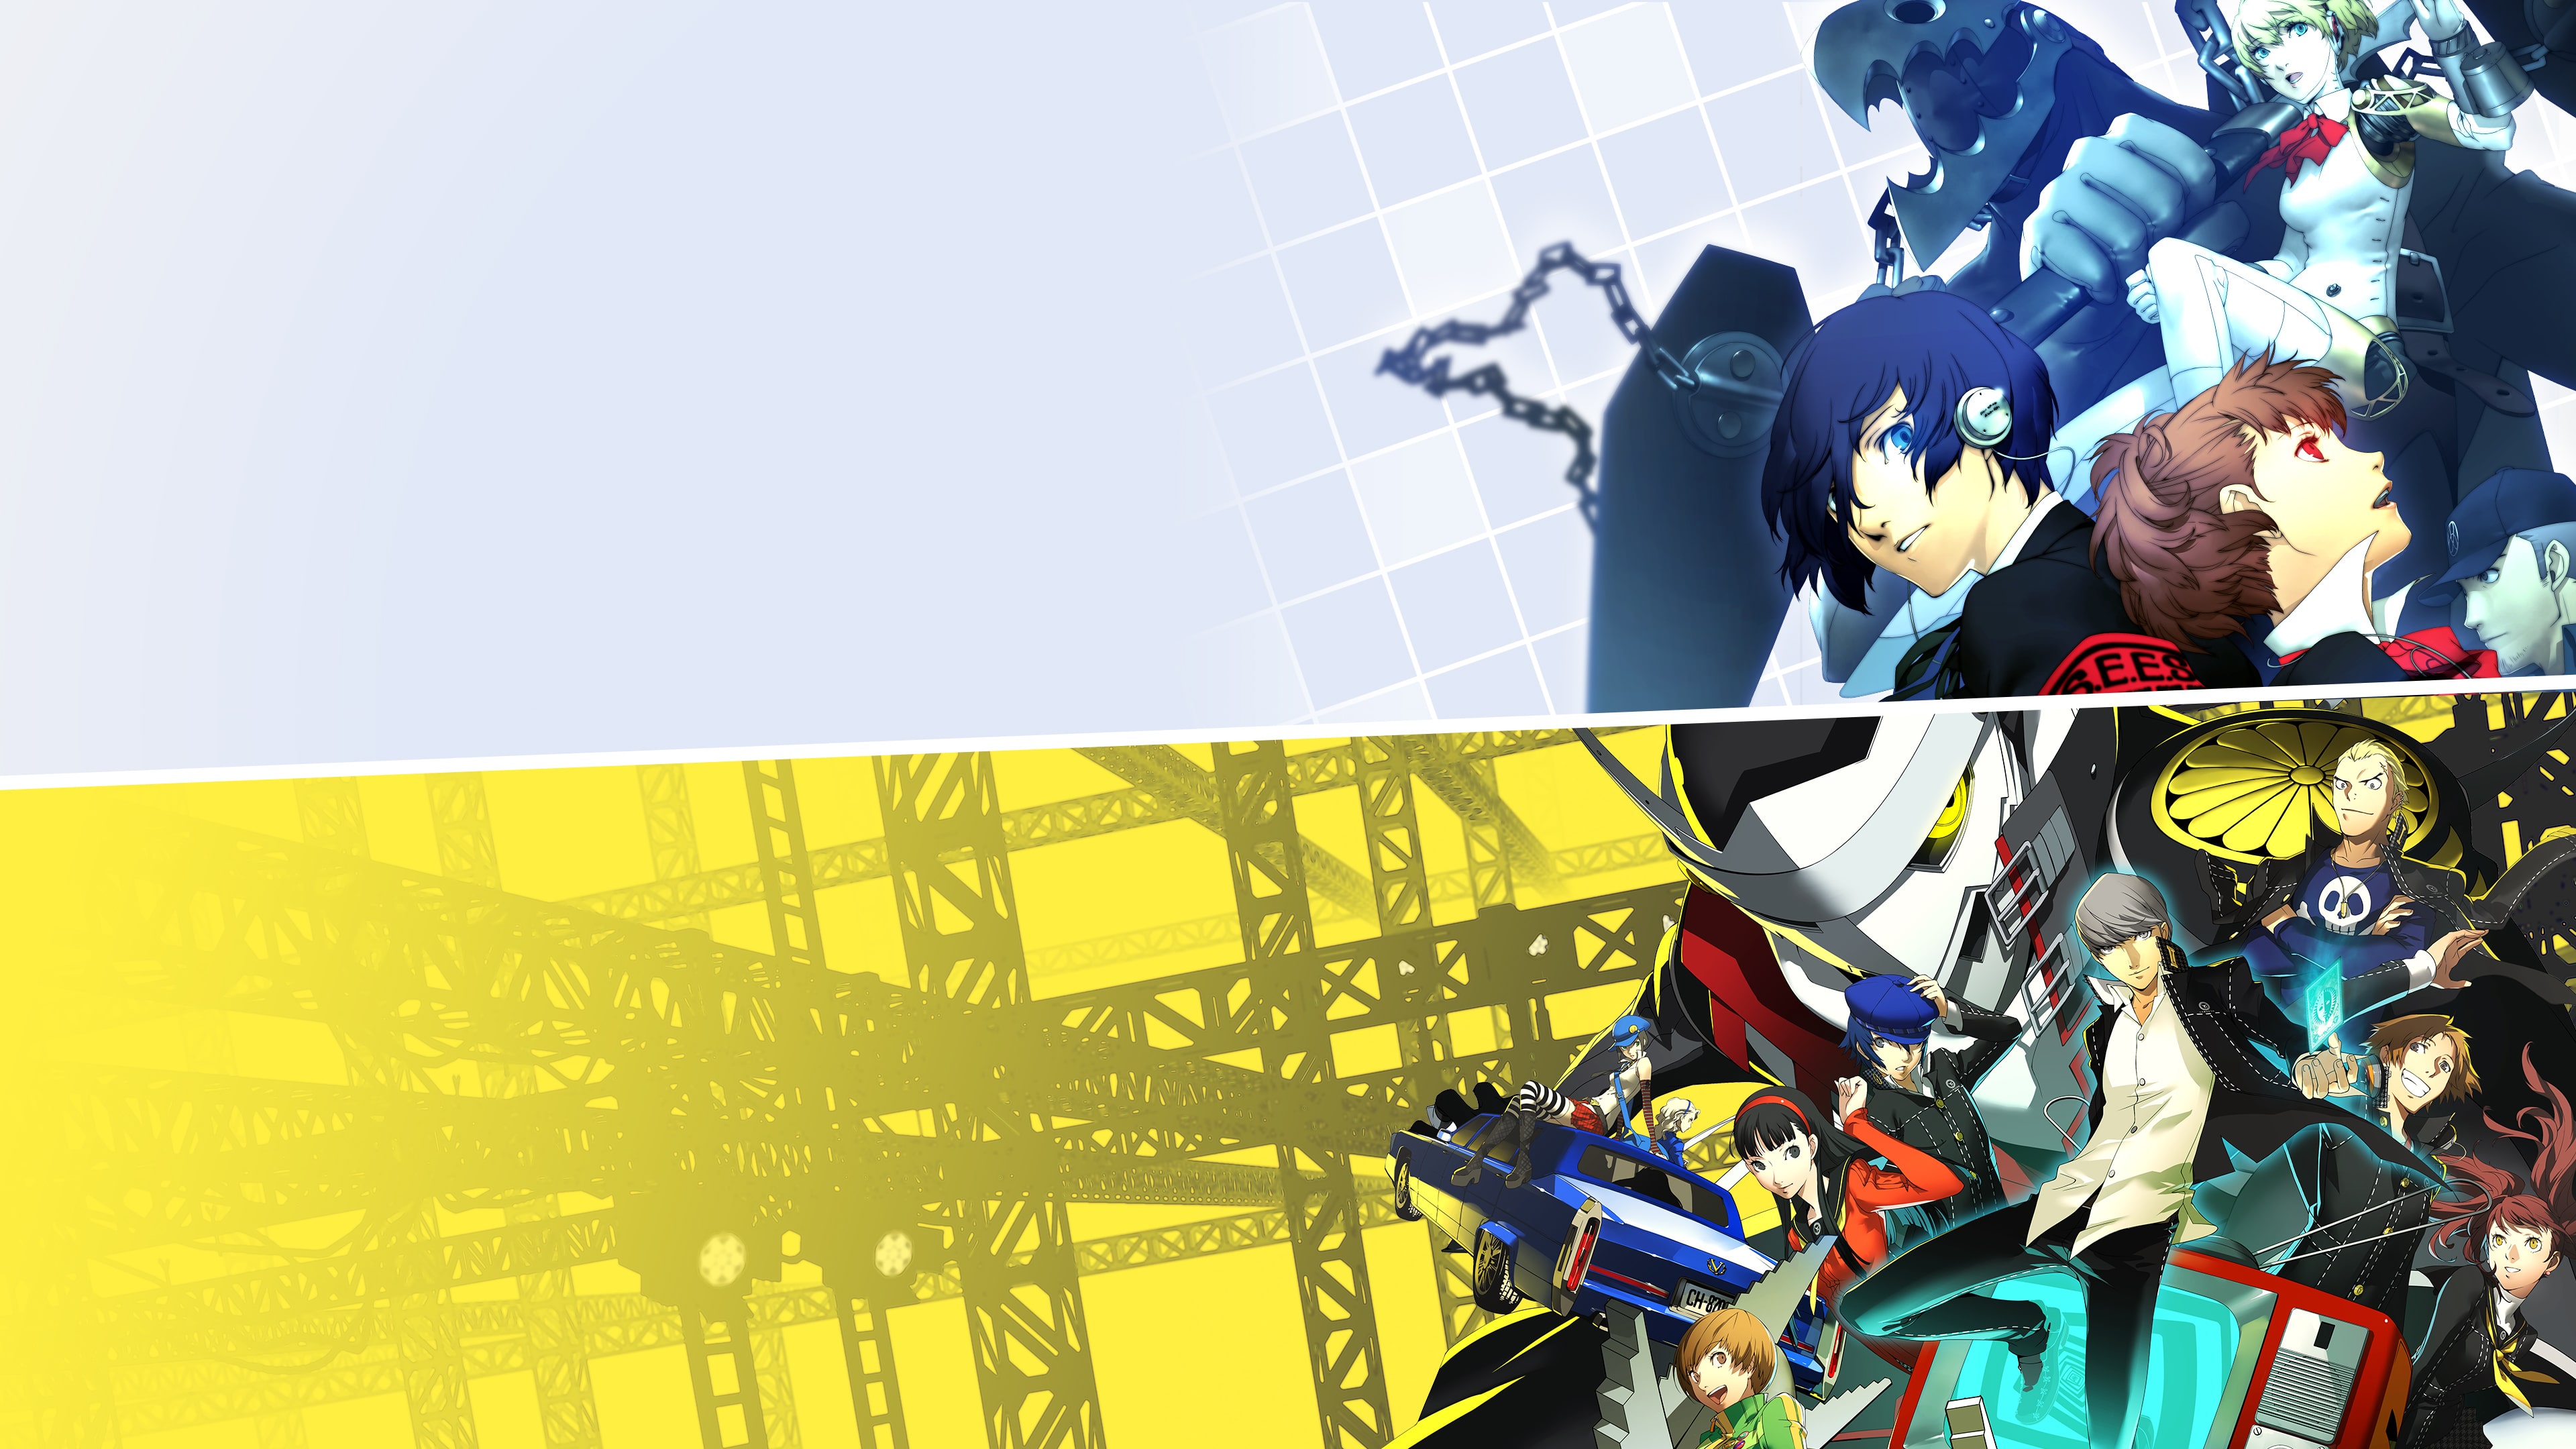 Persona 3 Portable & Persona 4 Golden Bundle (Simplified Chinese, English, Korean, Japanese, Traditional Chinese)